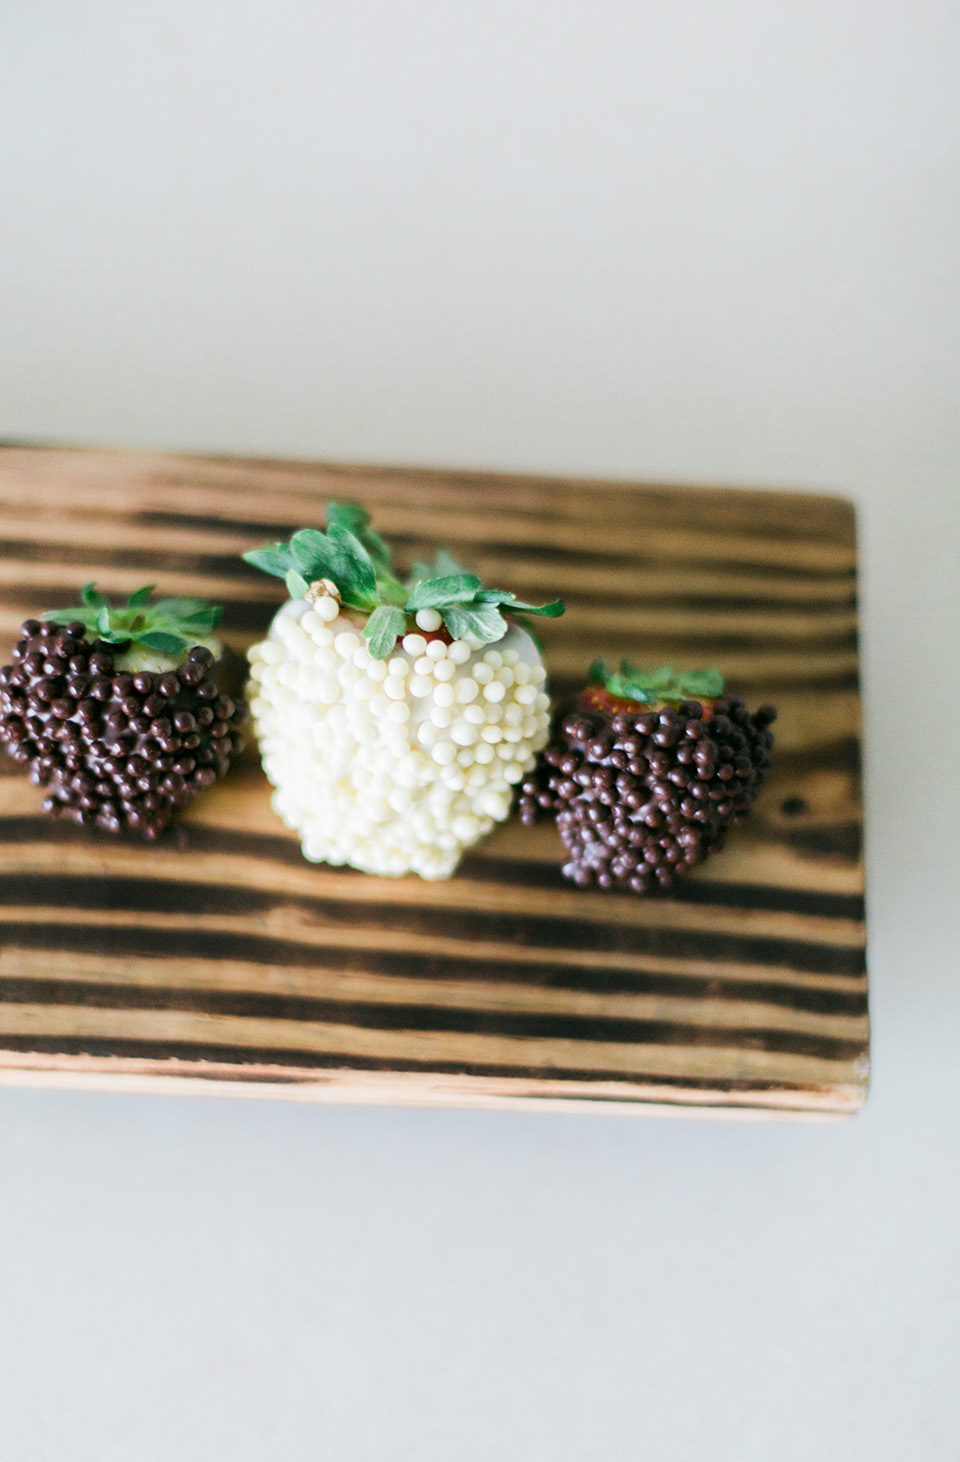 Image of chocolate covered strawberries on a wooden board at the Omni Amelia Island Plantation Resort.